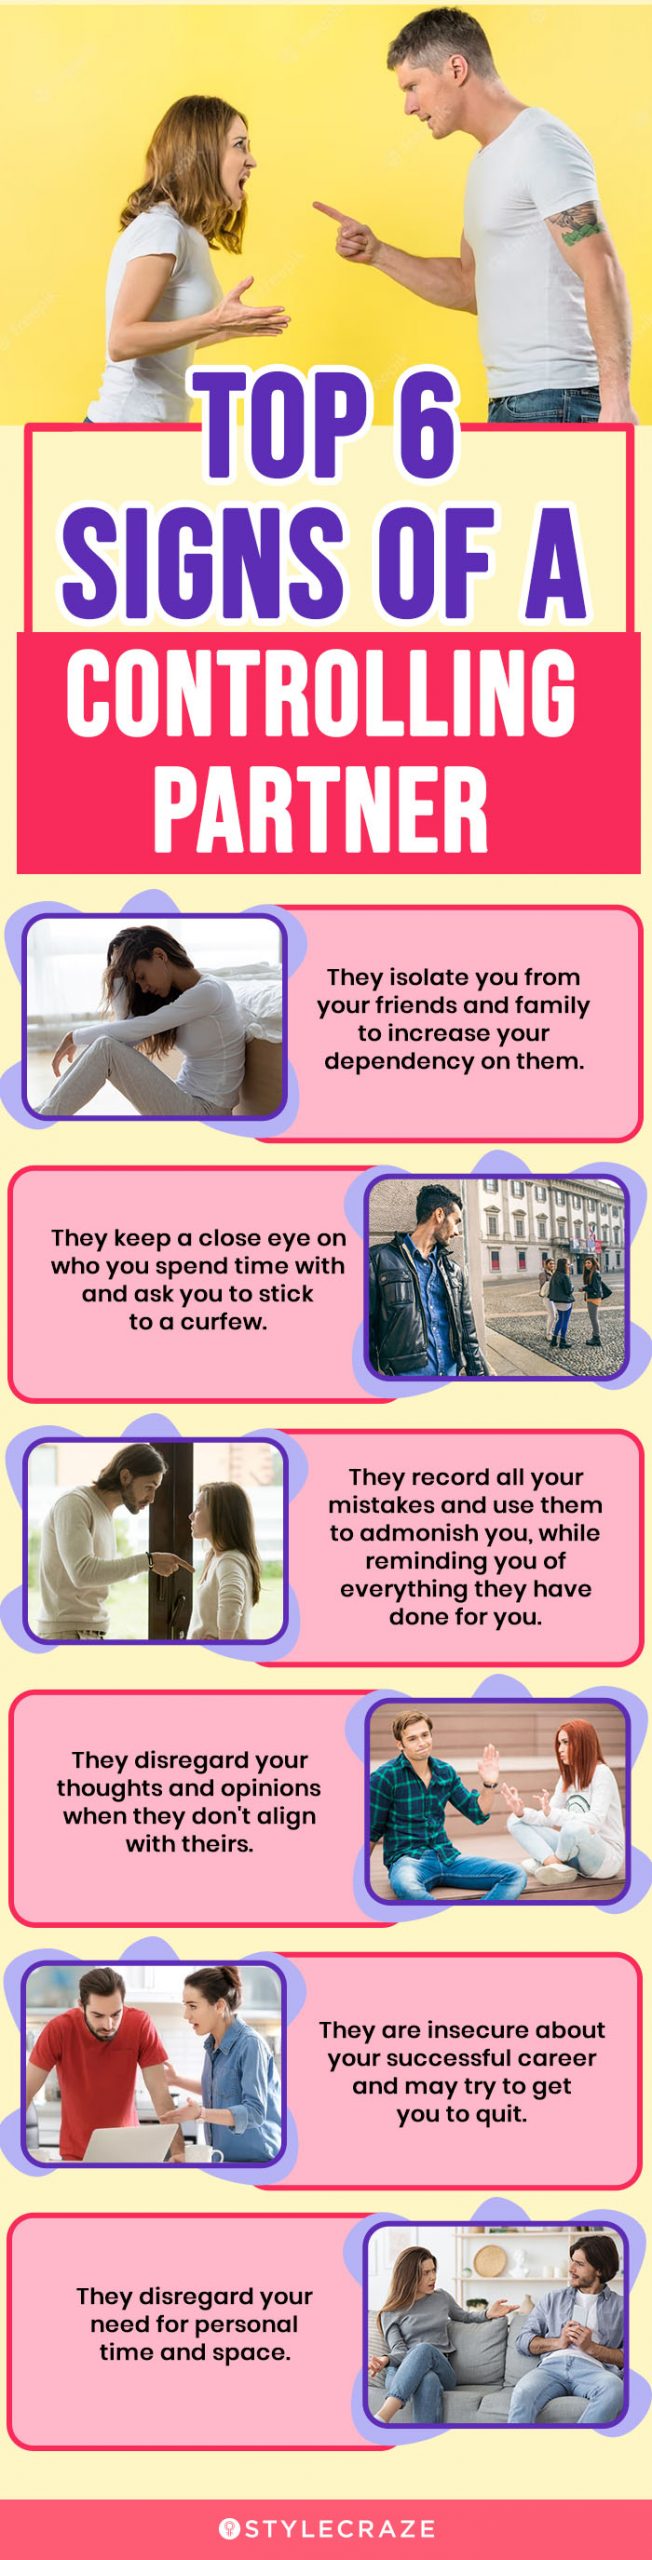 top 6 signs of a controlling partner (infographic)